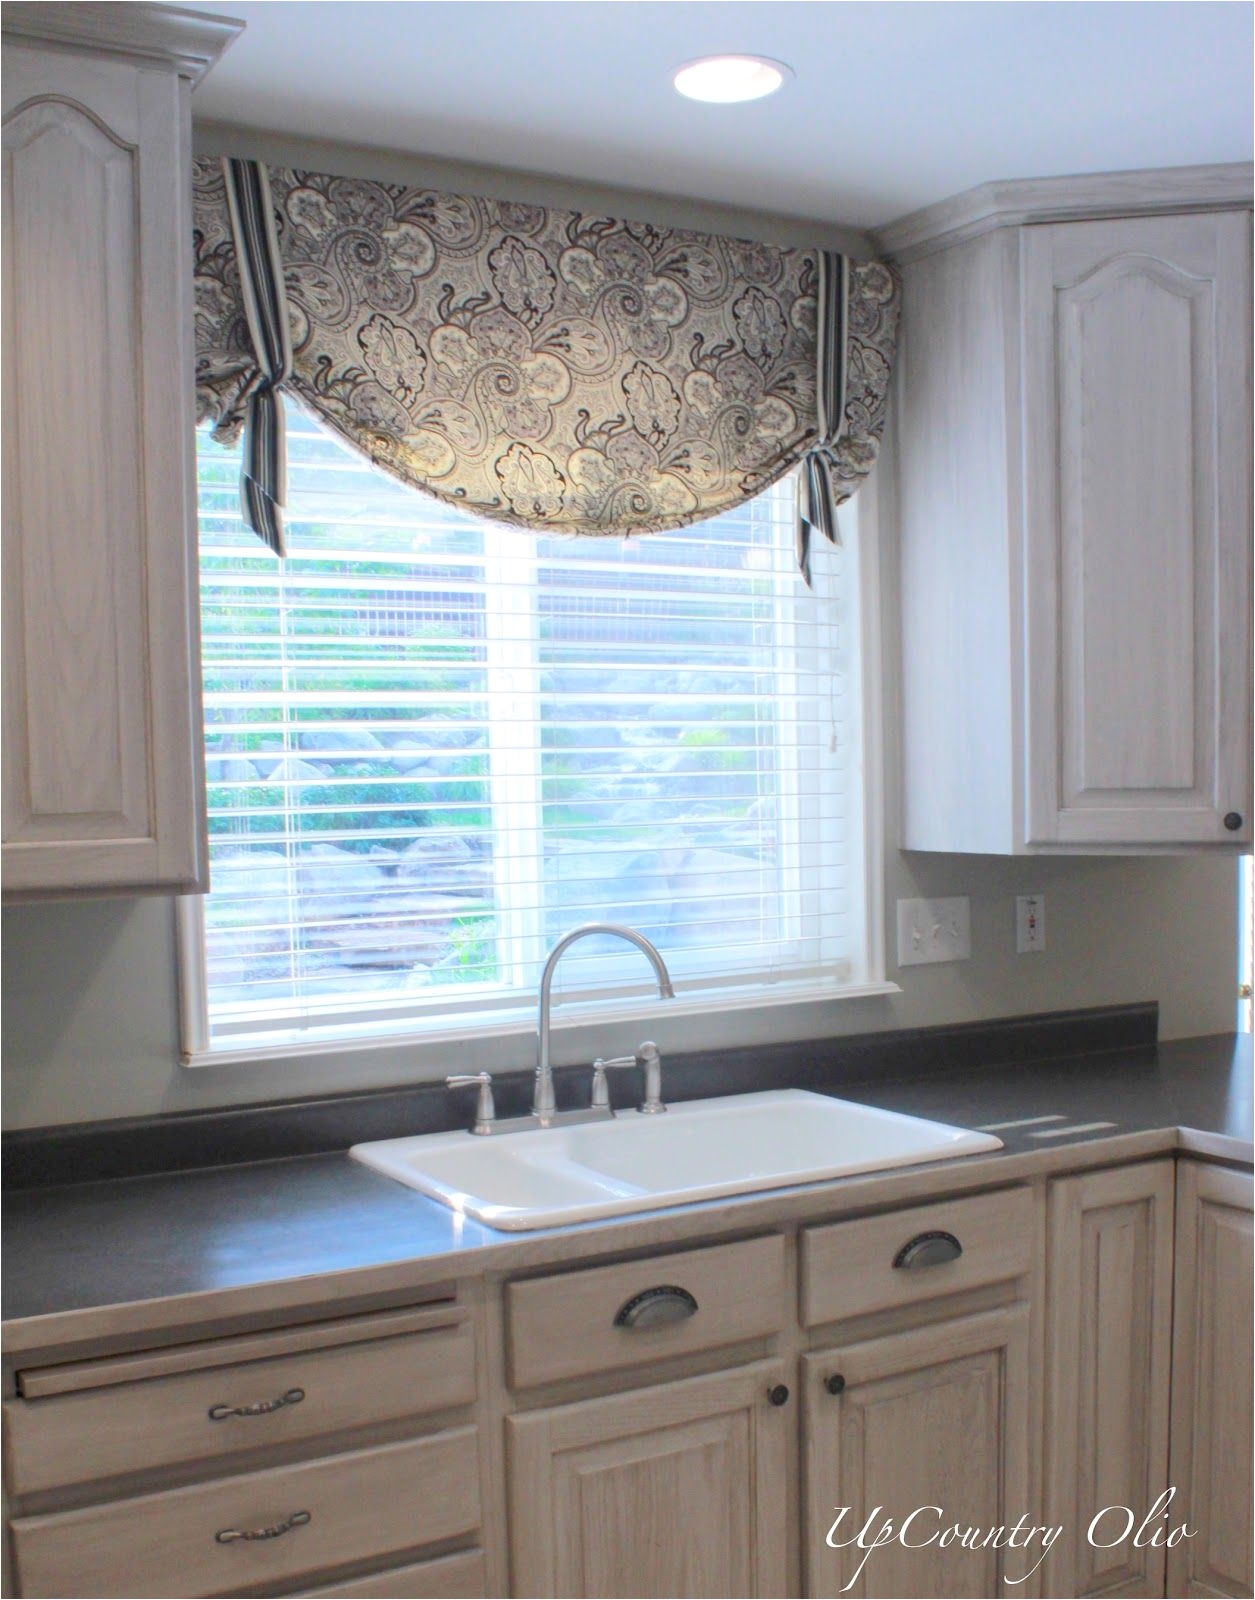 Kitchen Window Treatments Original Wooden Kitchen Cabinet In Front The Window bined With Brown Floral Window Curtain1